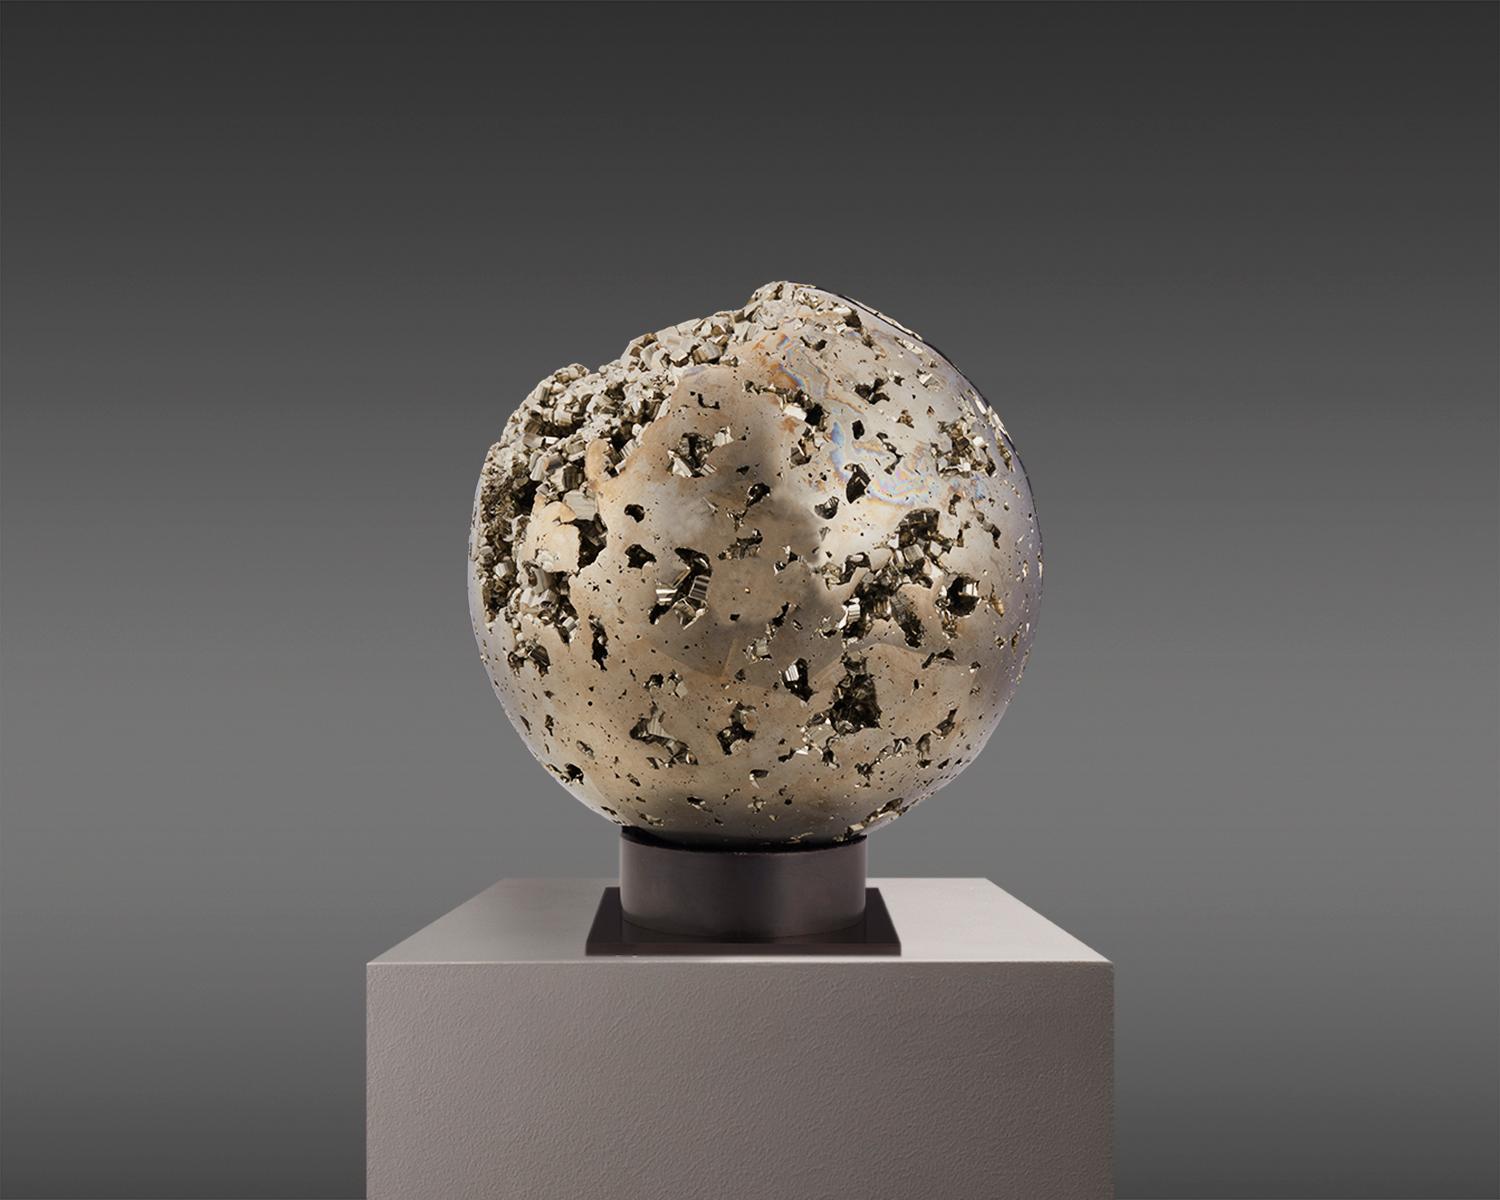 Captivating Pyrite sphere from Peru, a true natural masterpiece. This sphere is a polished marvel, with countless tiny Pyrite crystals embedded within, each sparkling with perfect luster. 

The way in which the crystals catch the light creates a